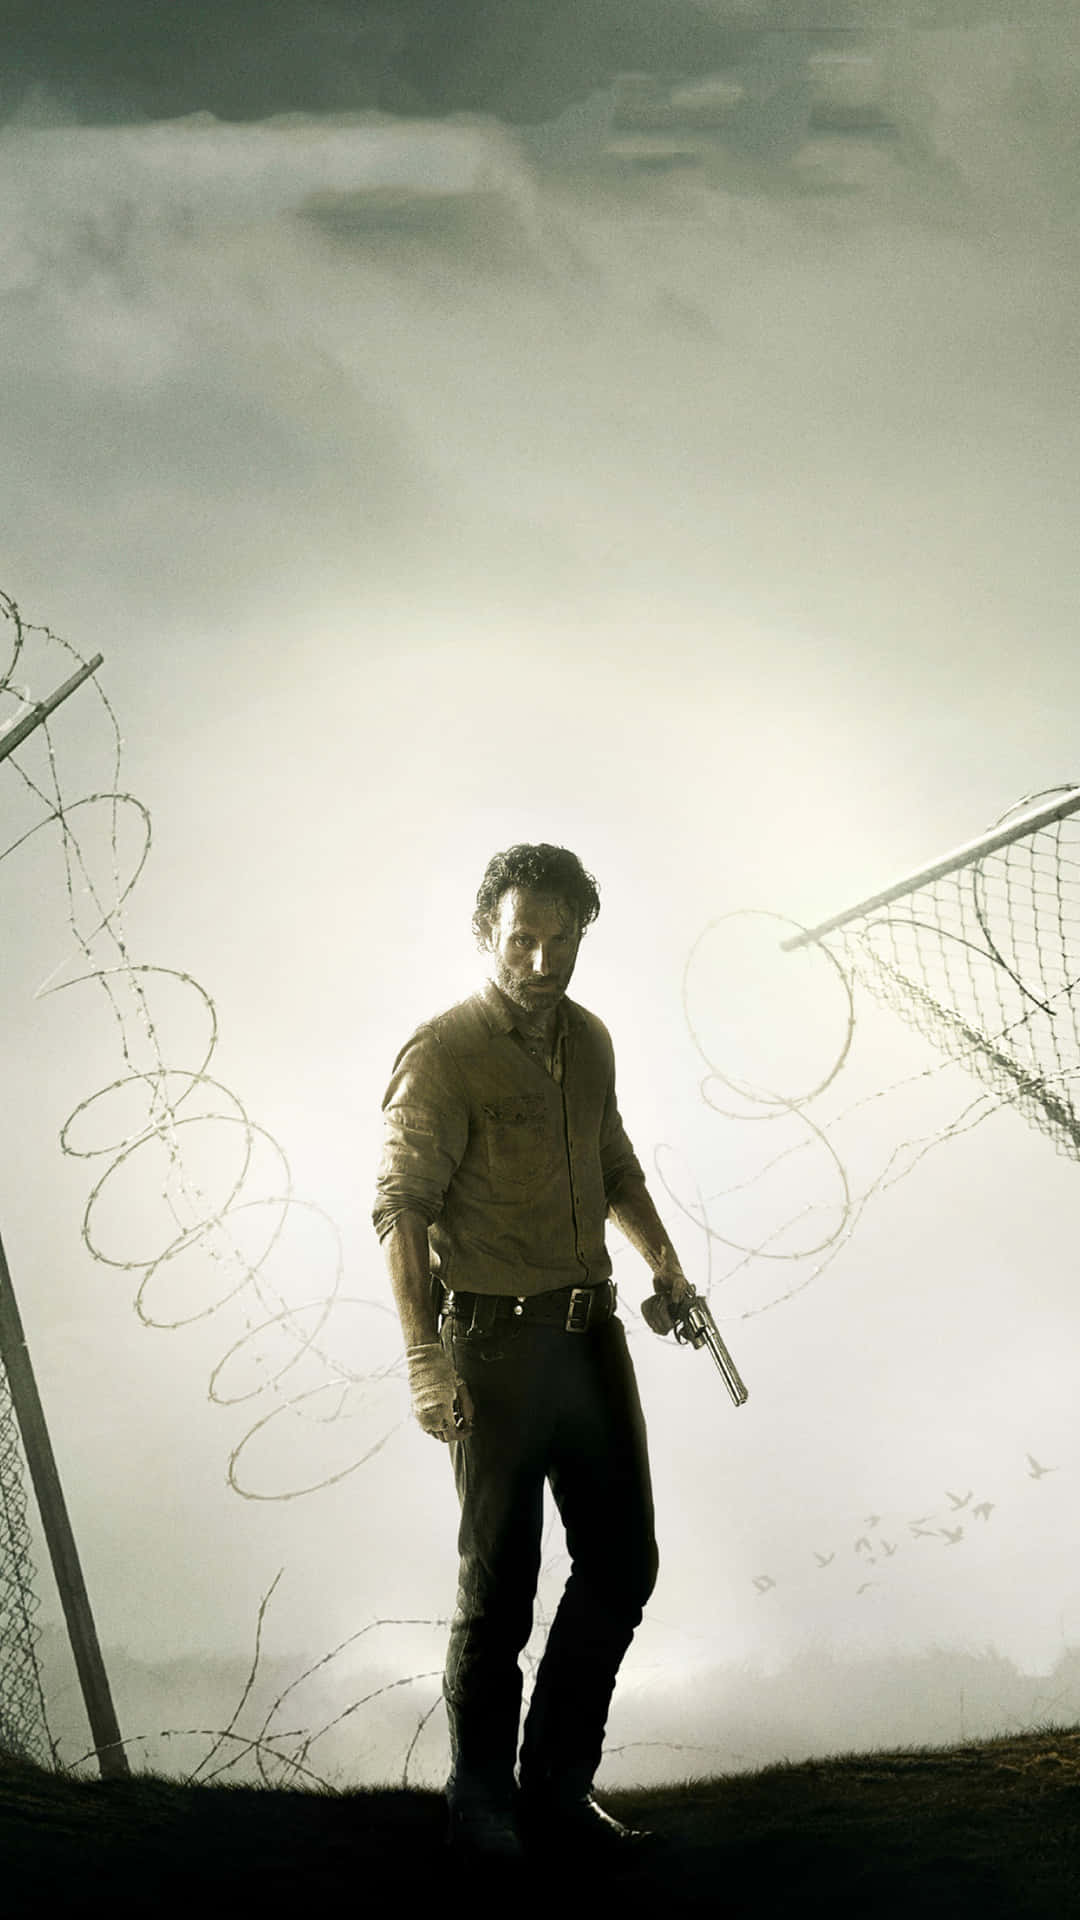 The Walking Dead Wallpaper to Enhance Your iPhone's Look Wallpaper